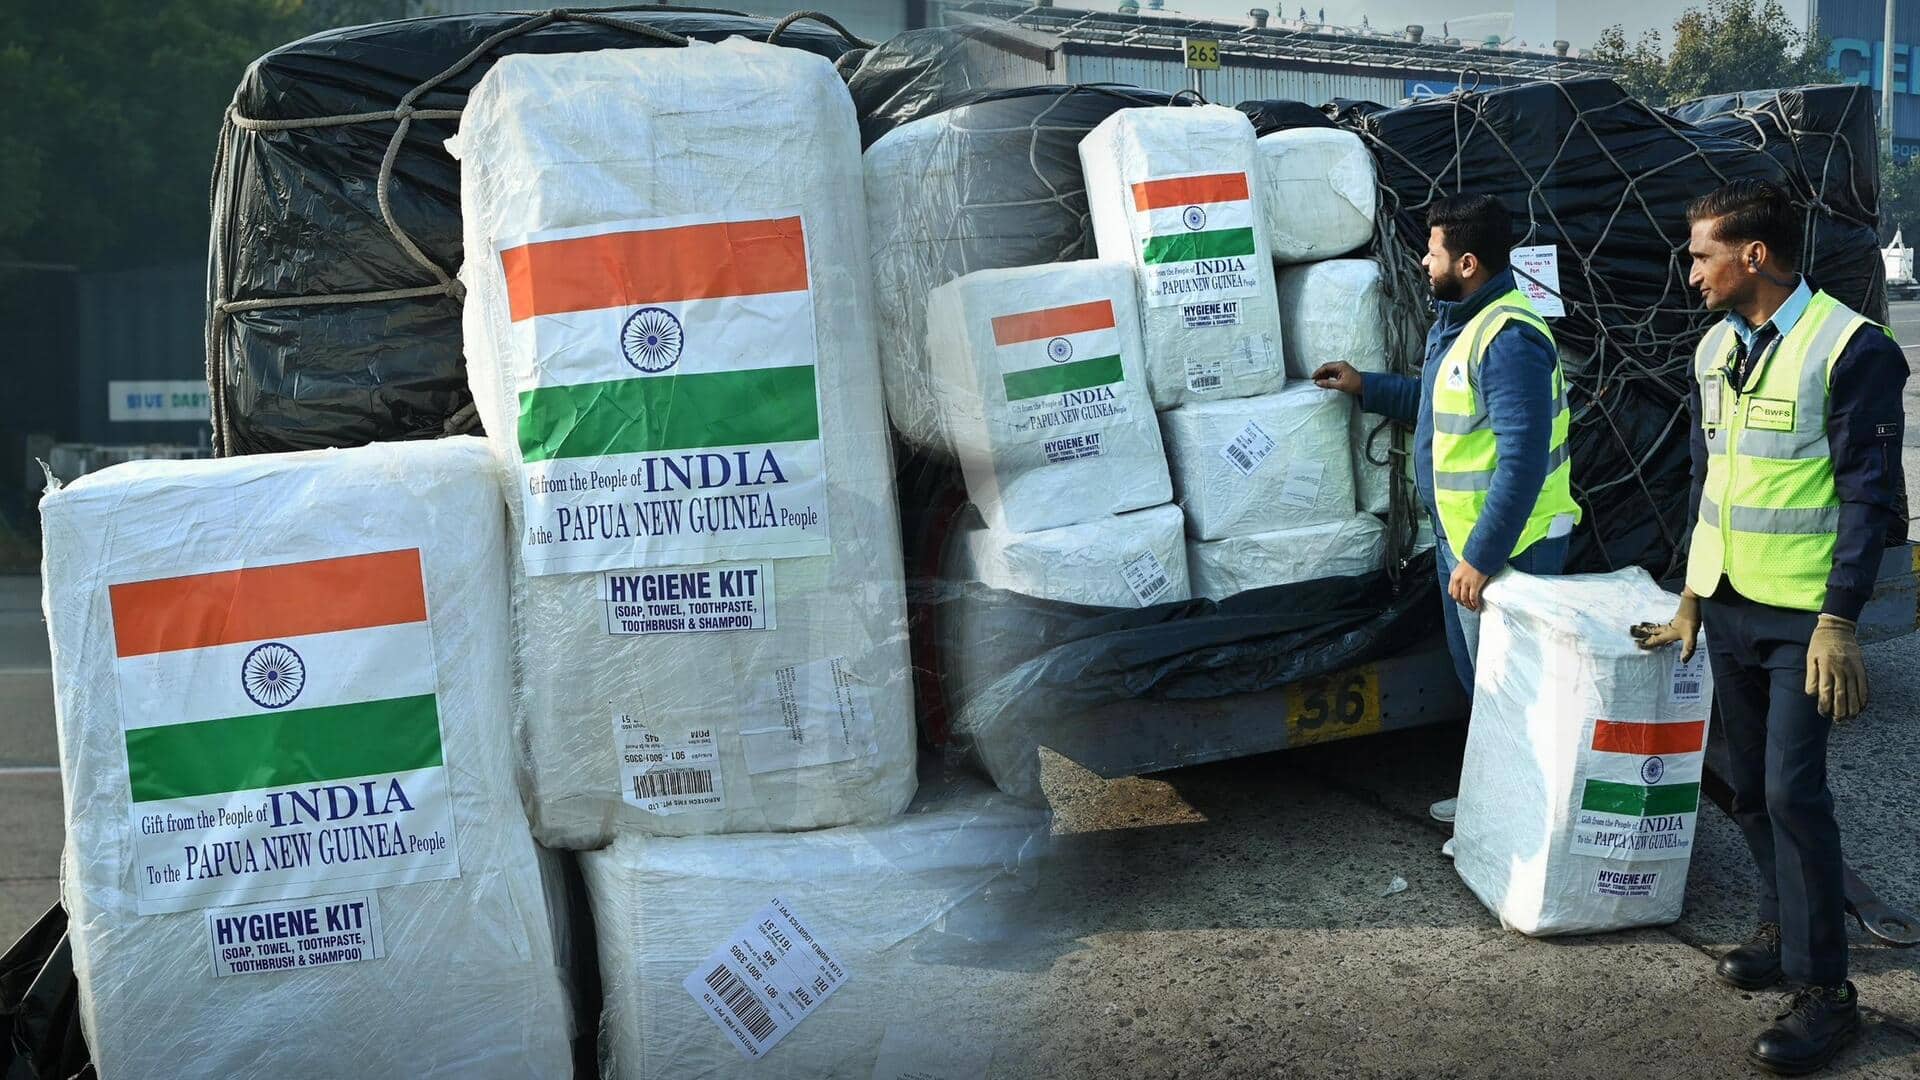 India sends Papua New Guinea relief supplies after volcanic eruption